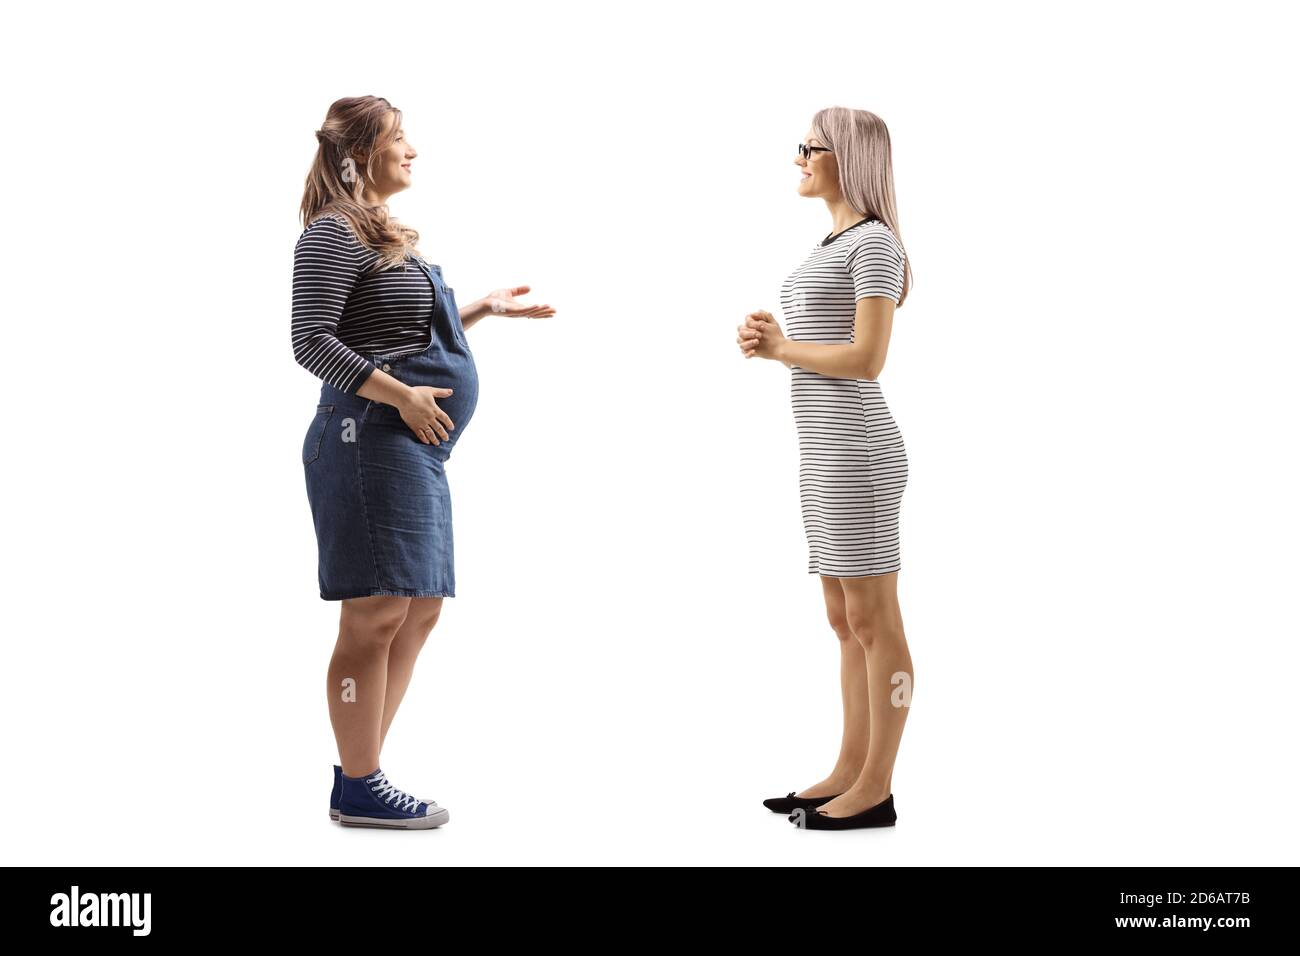 Full length profile shot of a pregnant woman and a blond woman having a conversation isolated on white background Stock Photo